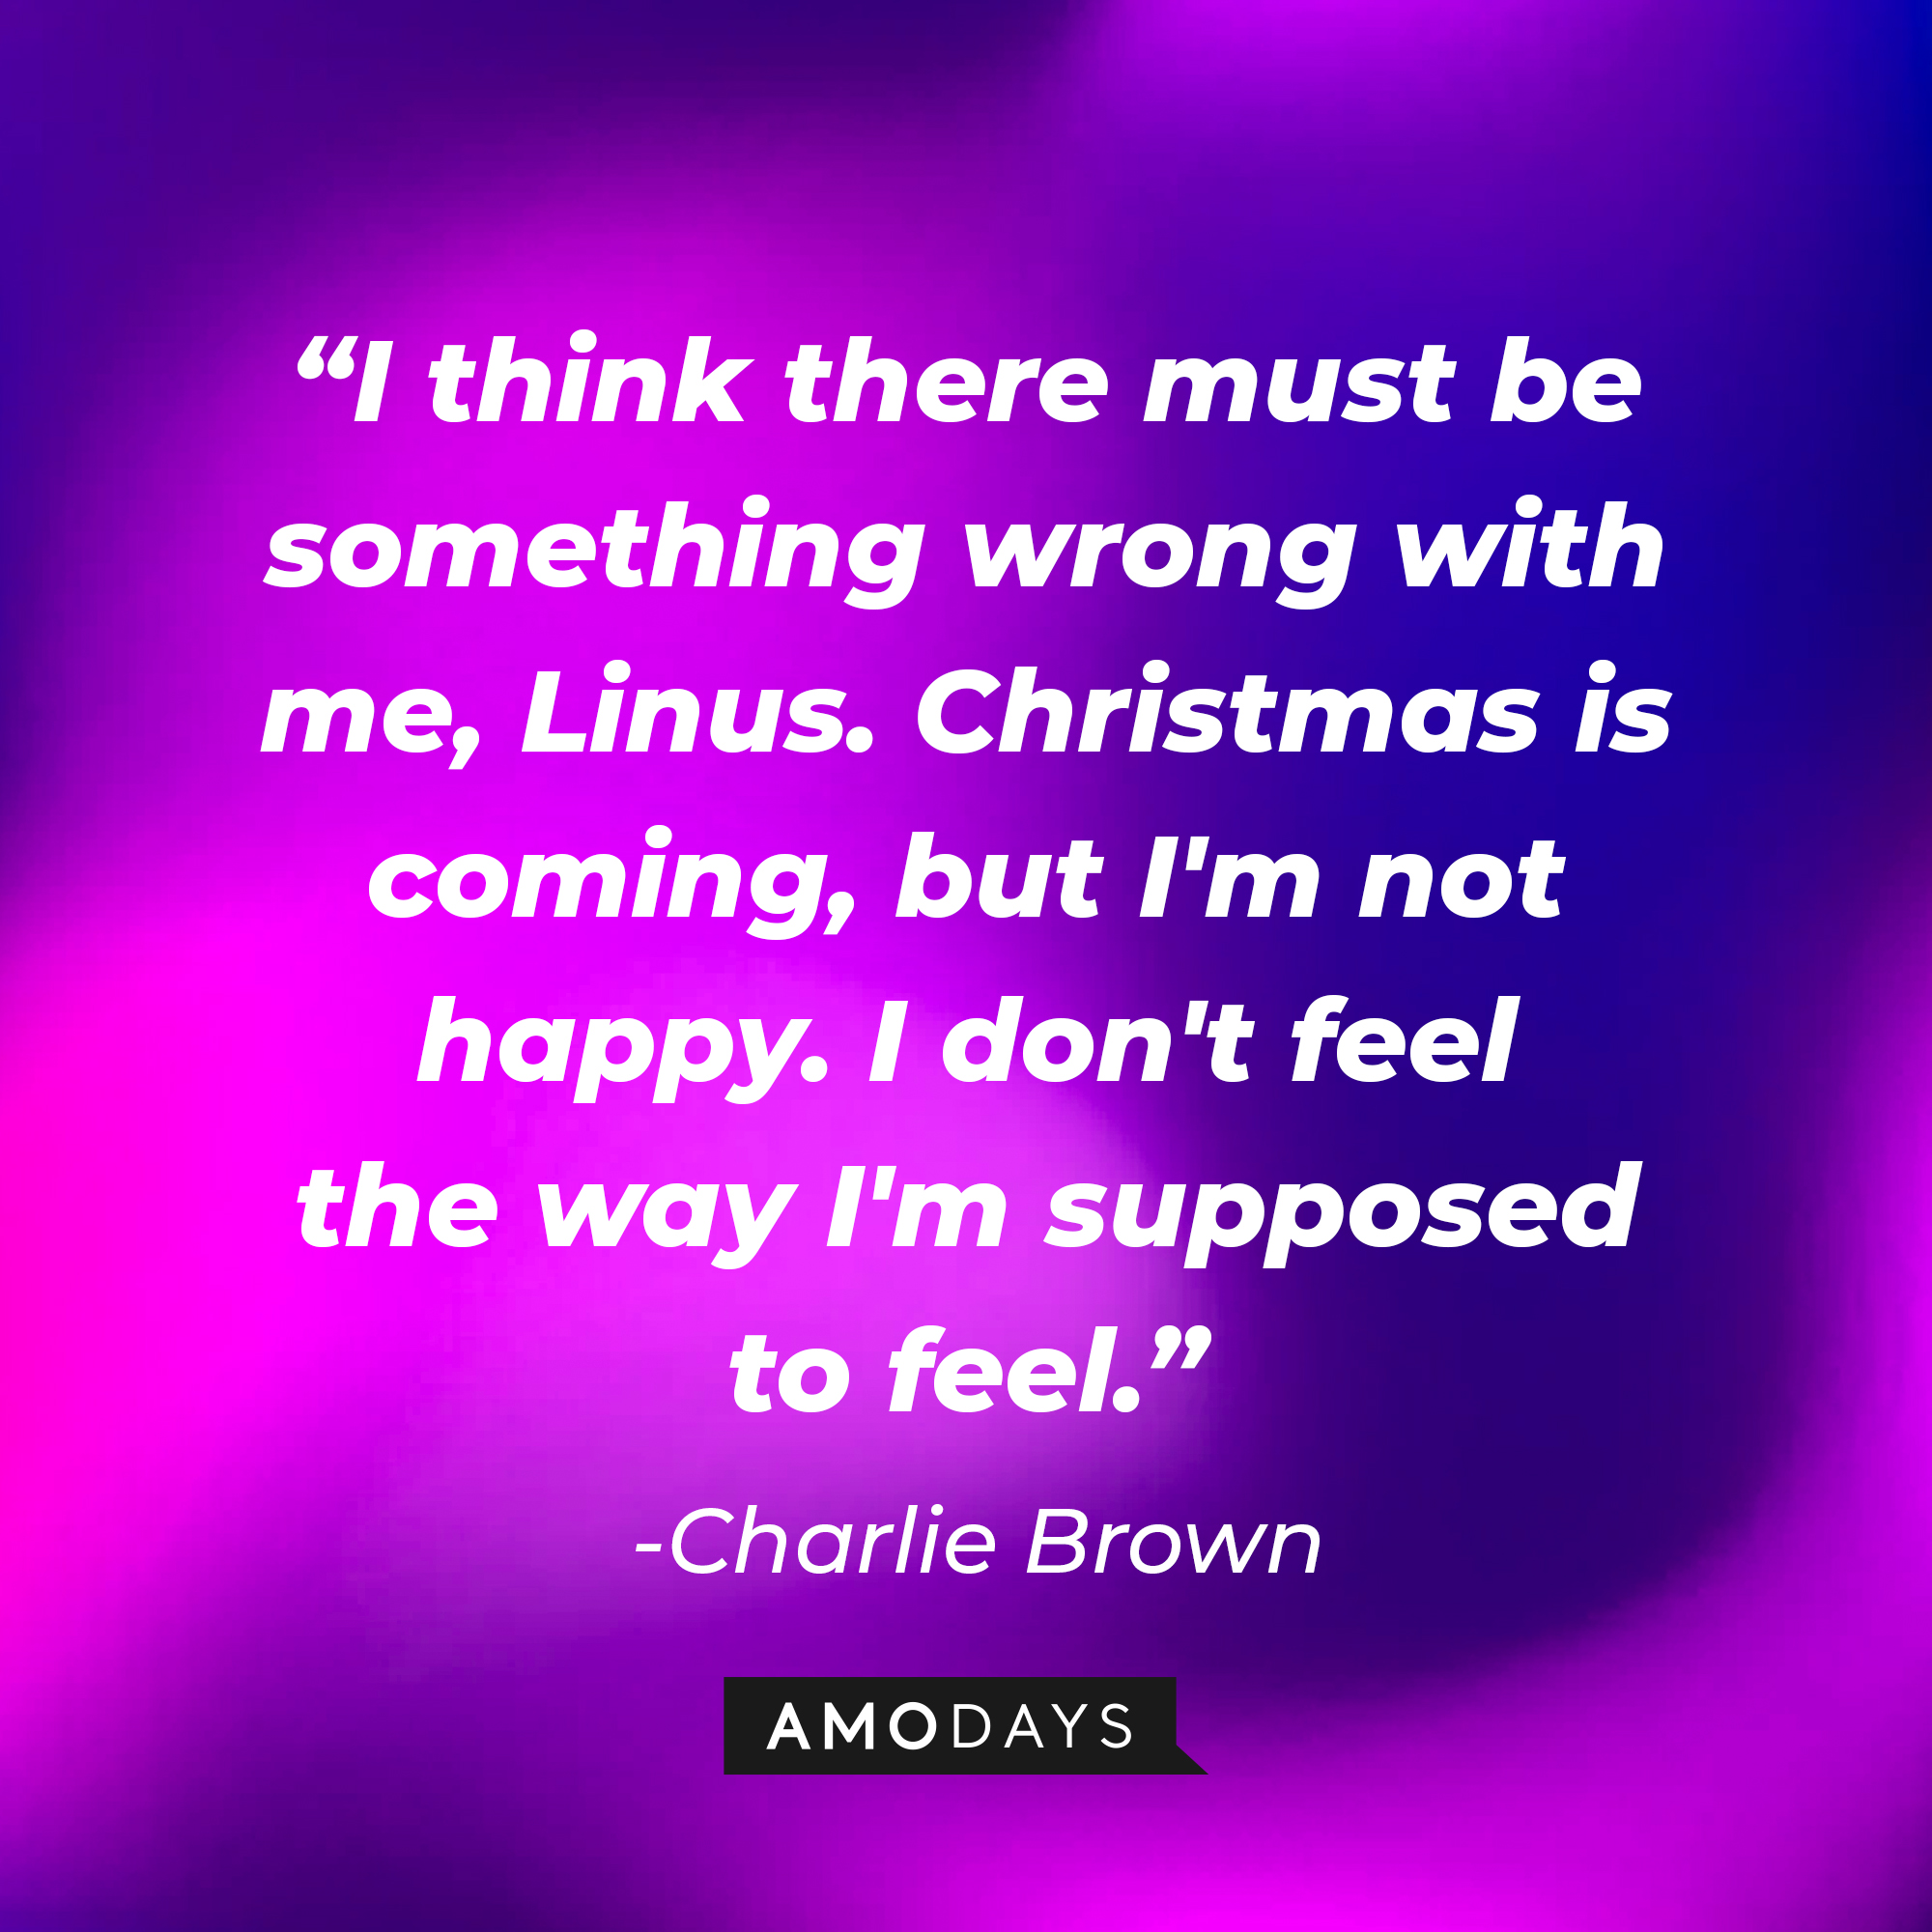 Charlie Brown's quote: "I think there must be something wrong with me, Linus. Christmas is coming, but I'm not happy. I don't feel the way I'm supposed to feel." | Source: Amodays